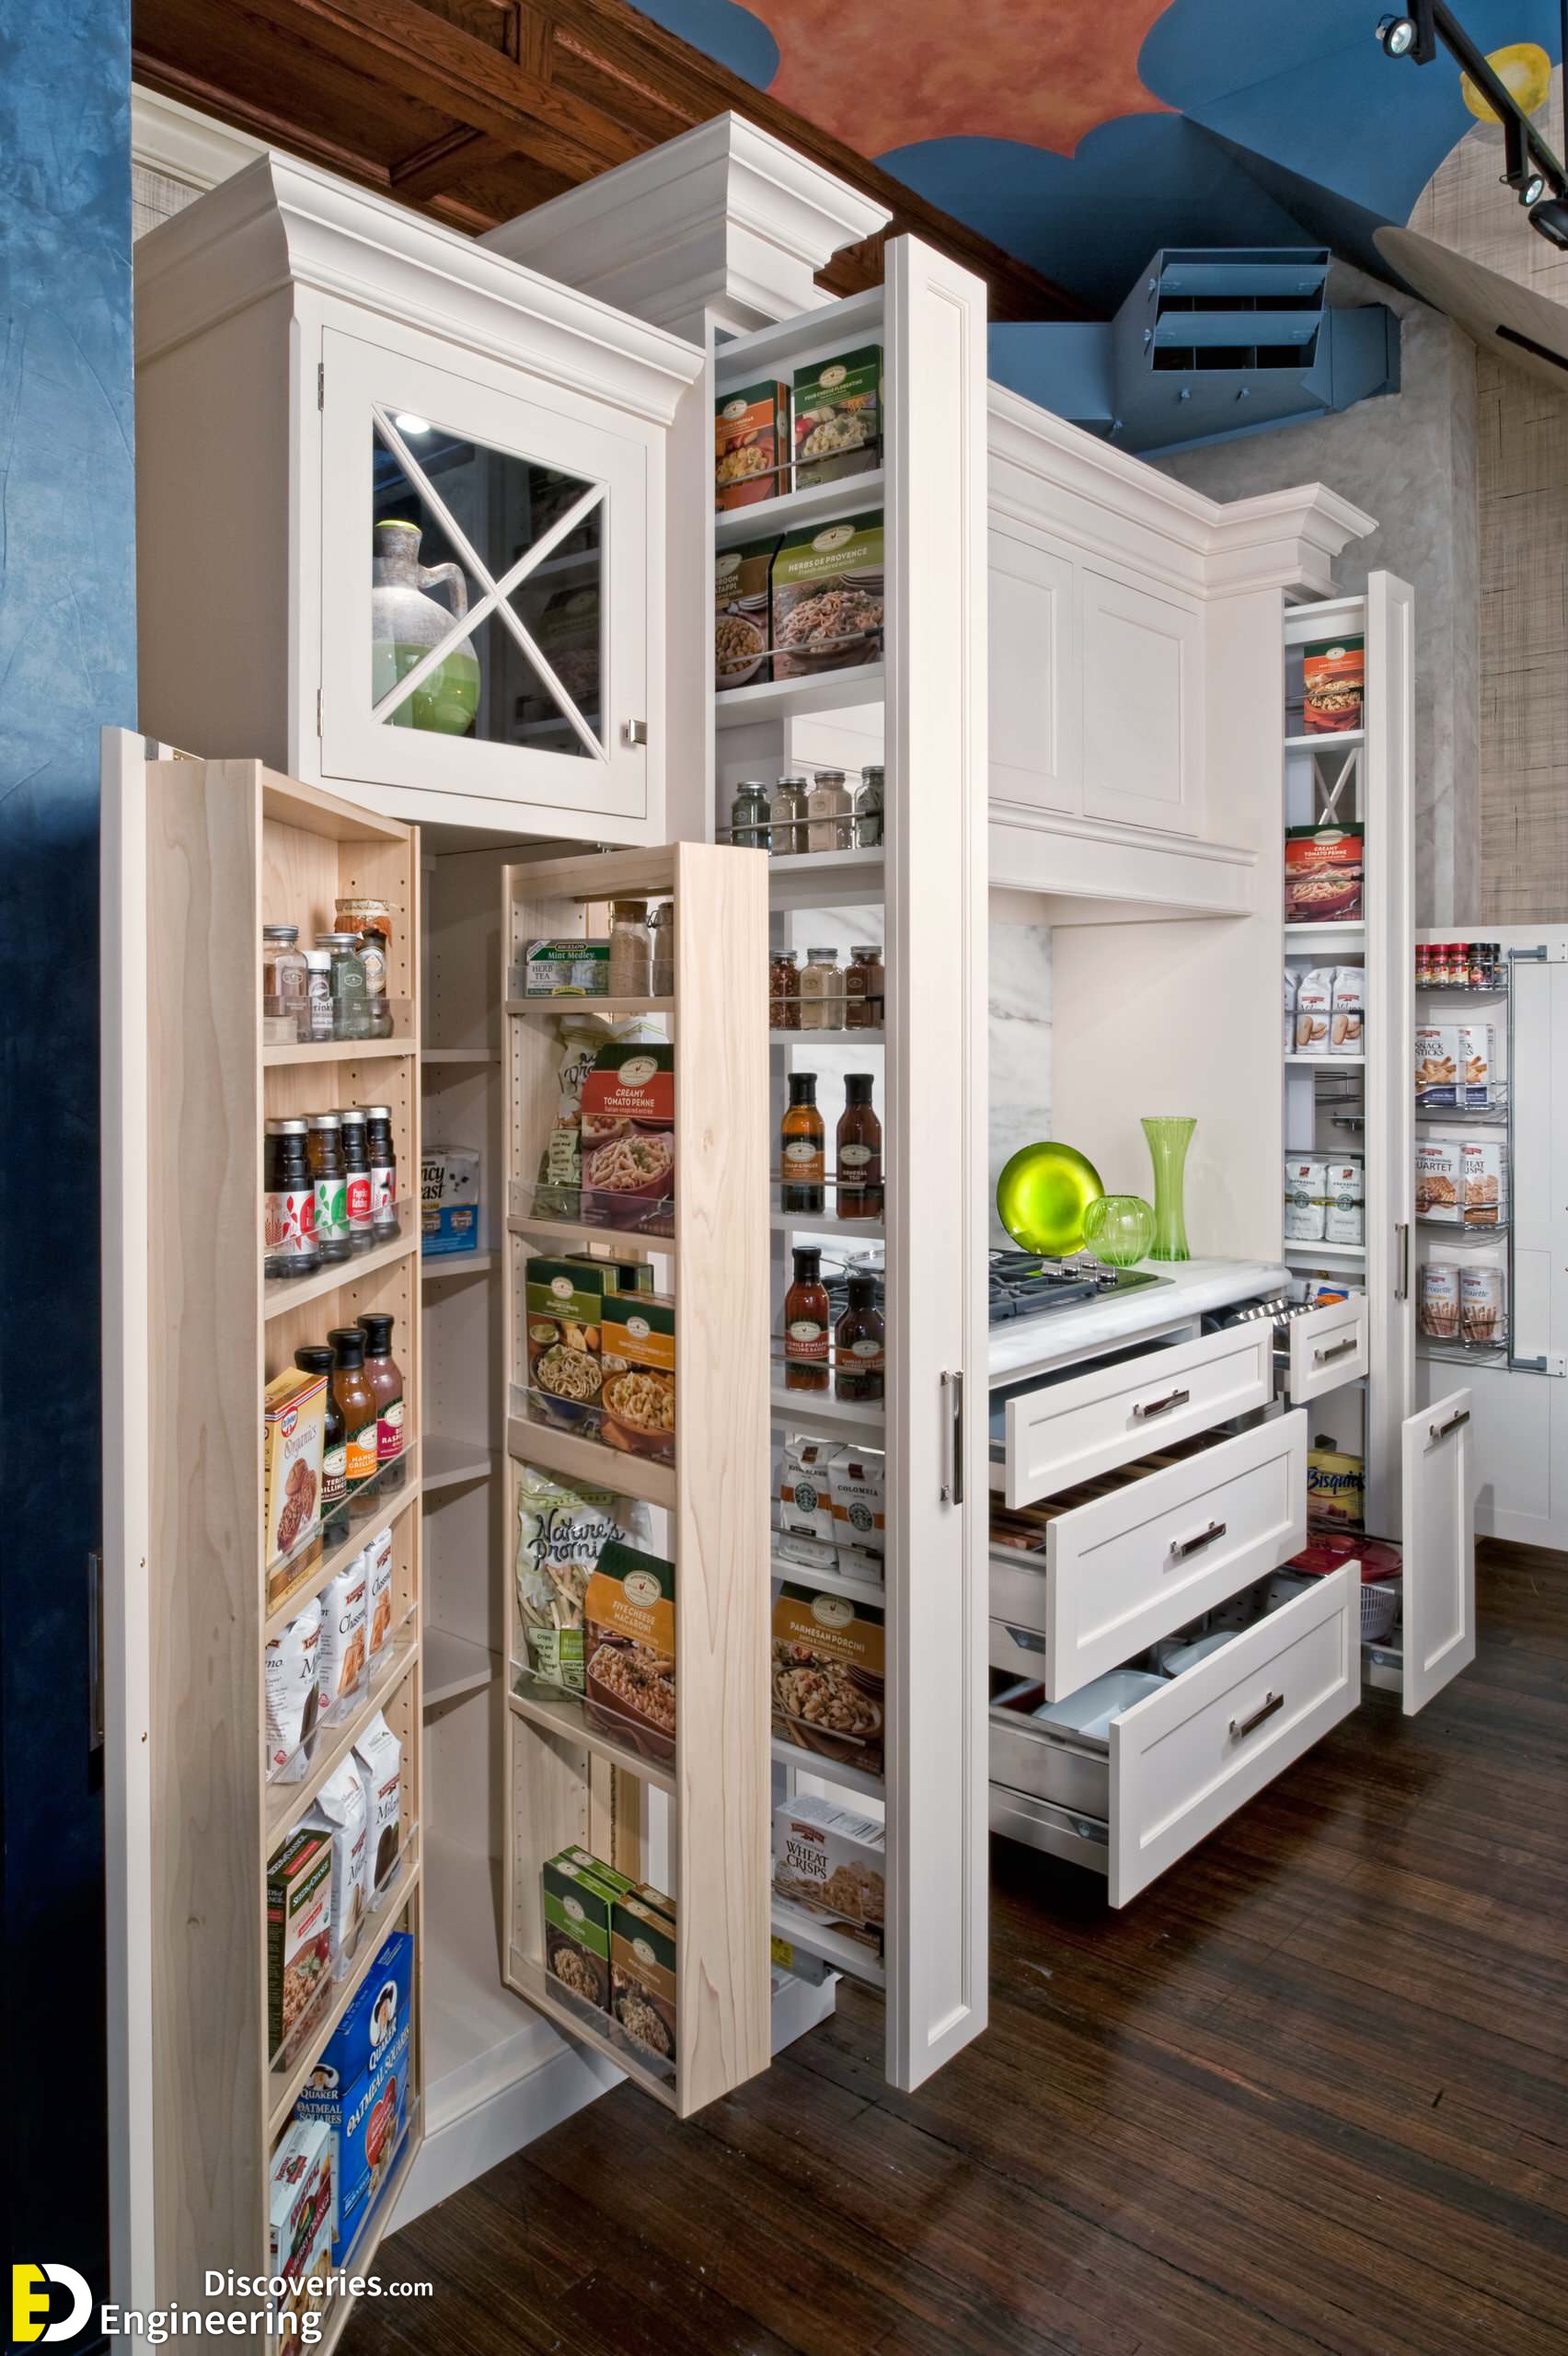 https://engineeringdiscoveries.com/wp-content/uploads/2023/09/15-engineering-discoveries-maximize-your-space-brilliant-kitchen-organization-ideas-for-effortless-cabinet-storage.jpg